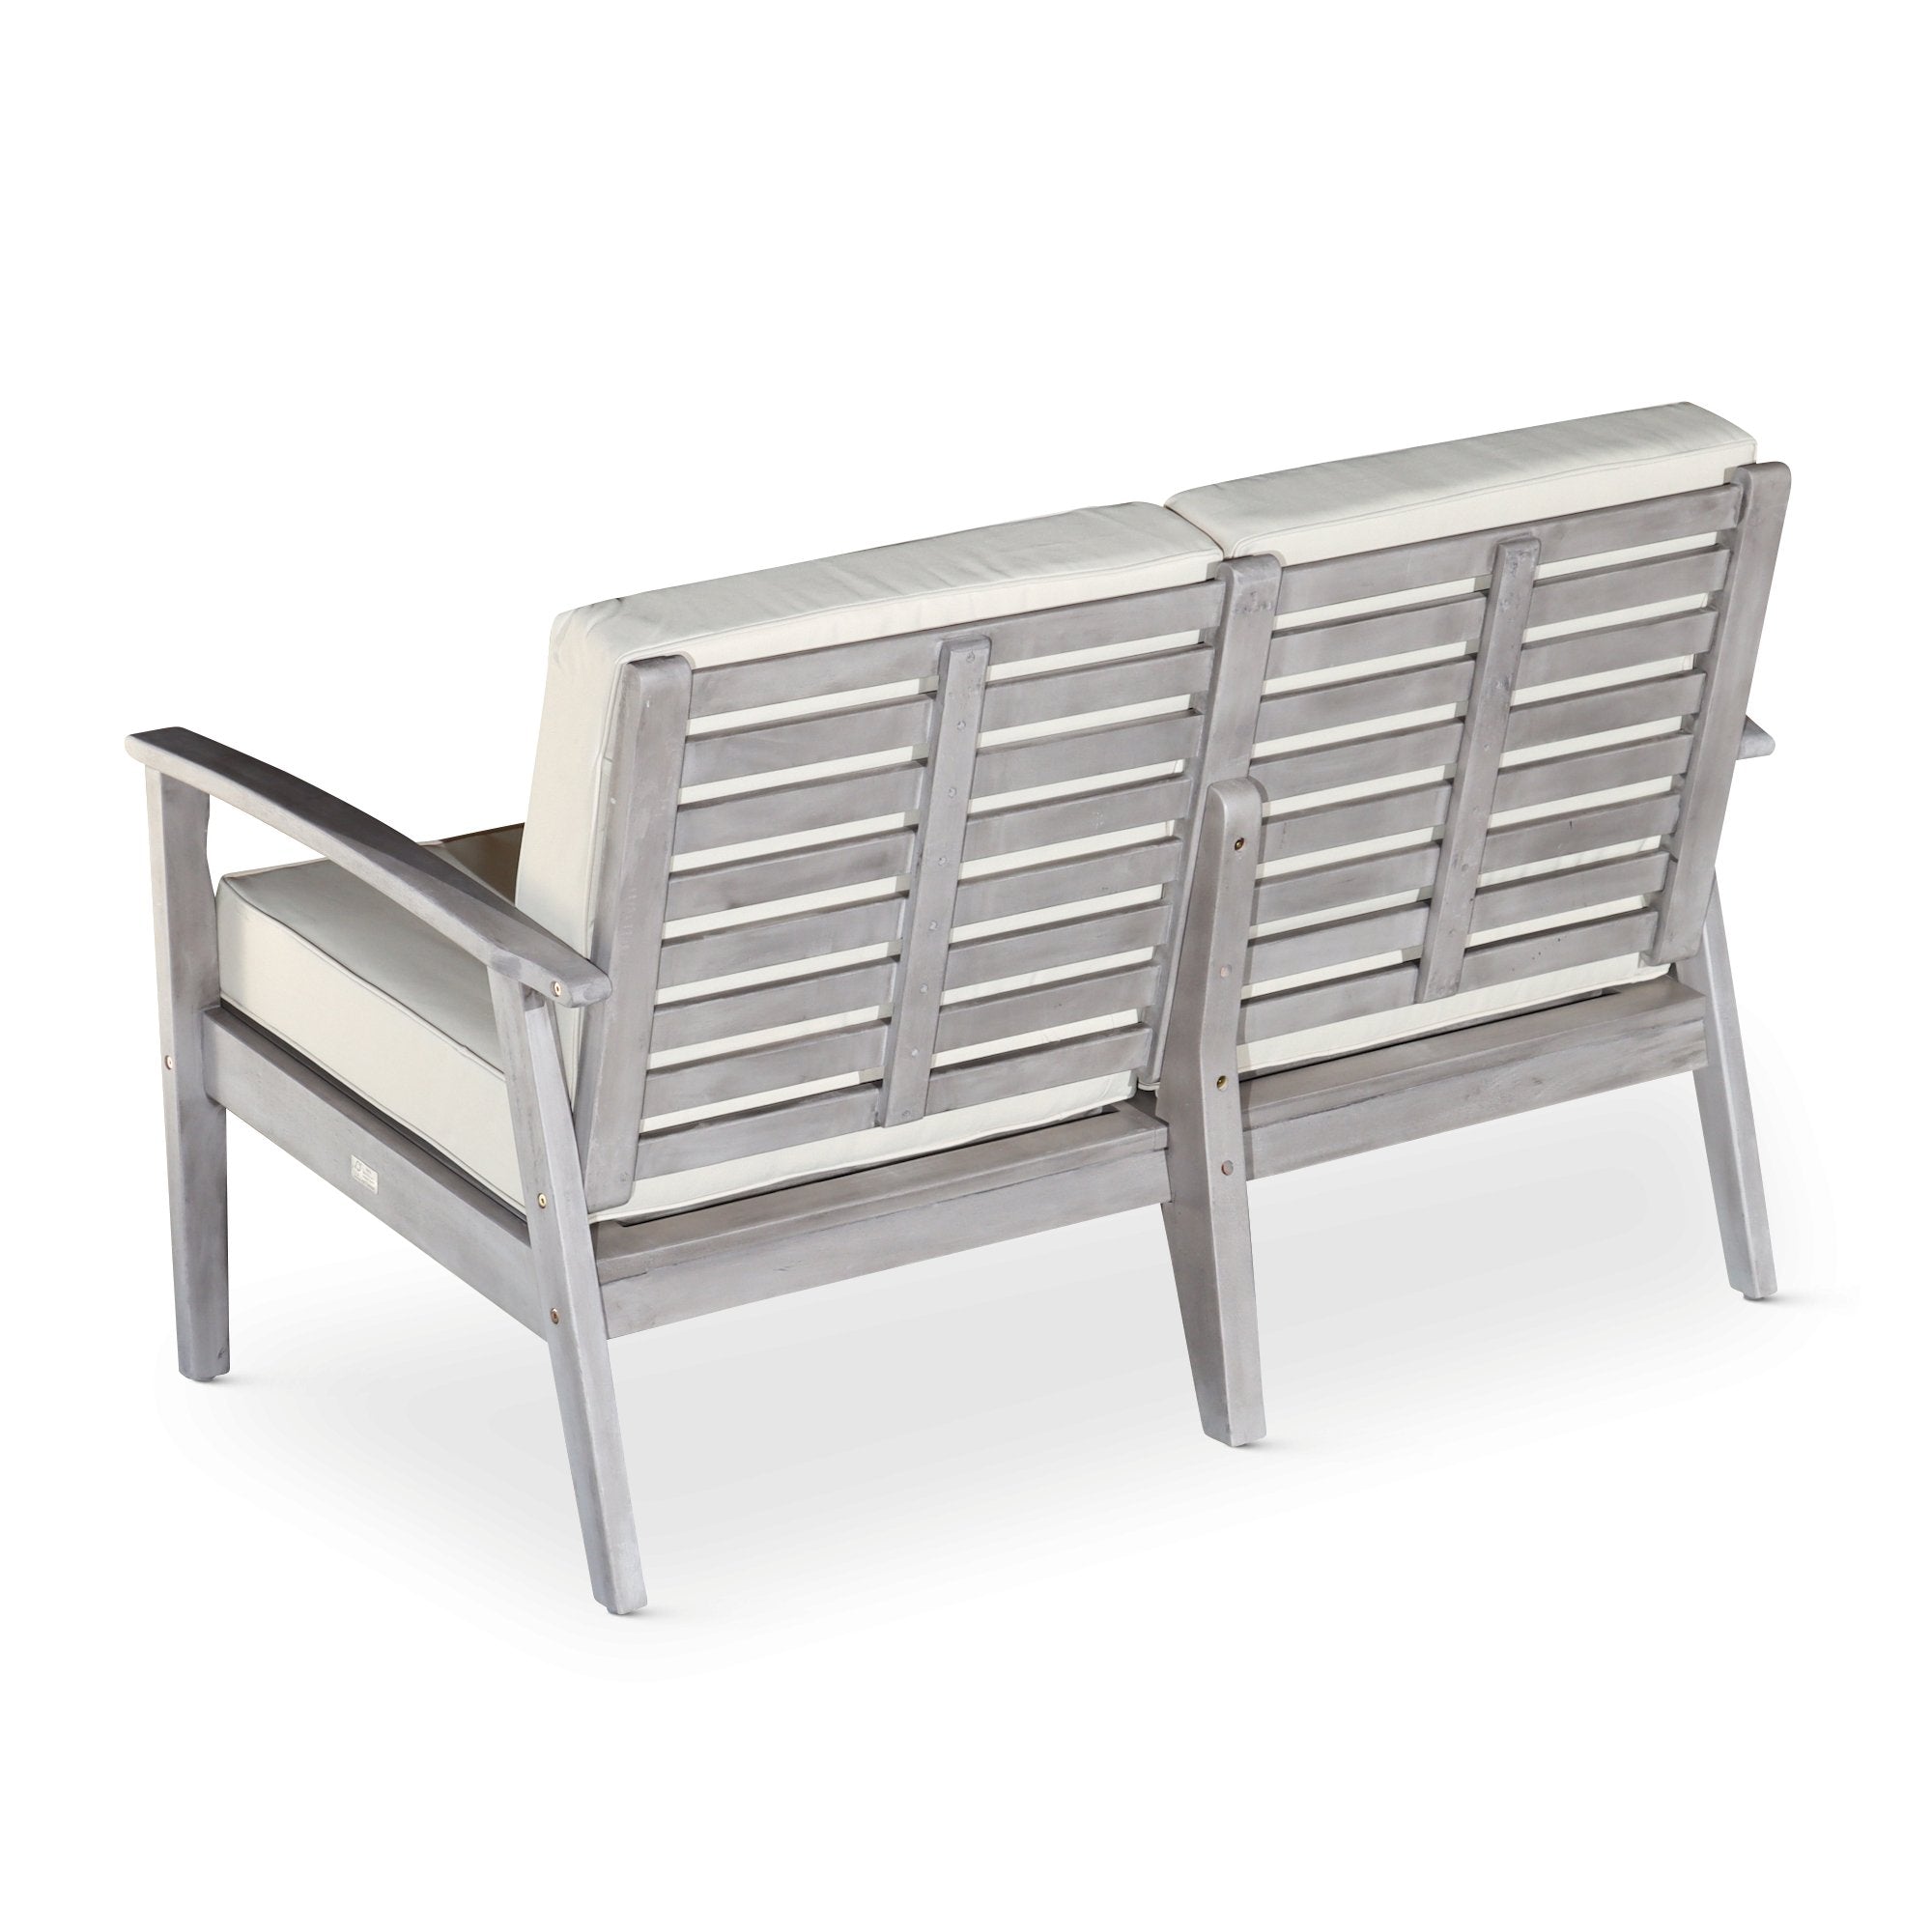 Outdoor Loveseat with Cushions, Driftwood Gray Finish, Sage Cushions - Tuesday Morning-Chairs & Seating